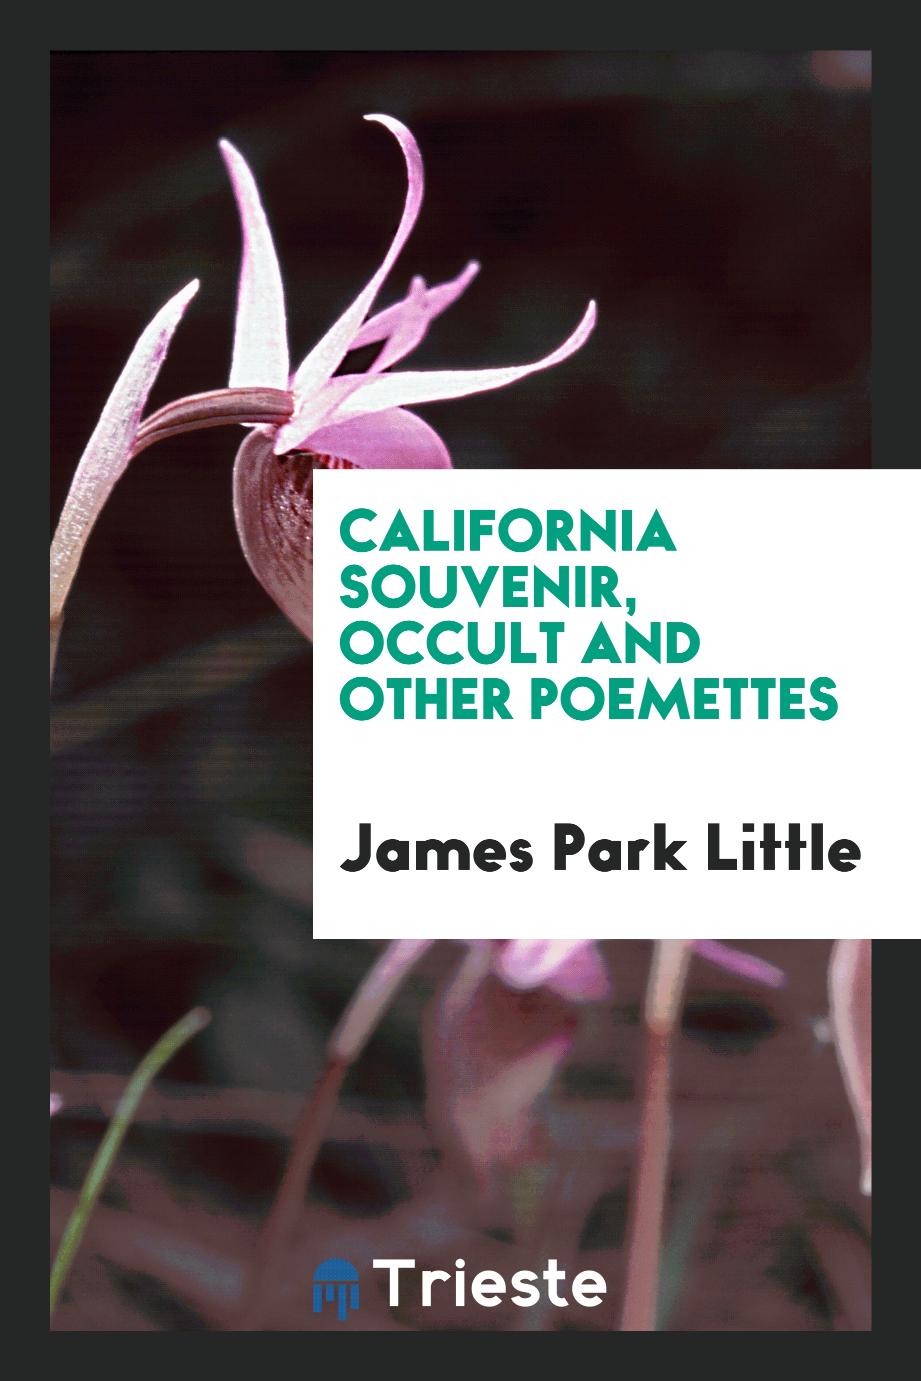 James Park Little - California Souvenir, Occult and Other Poemettes